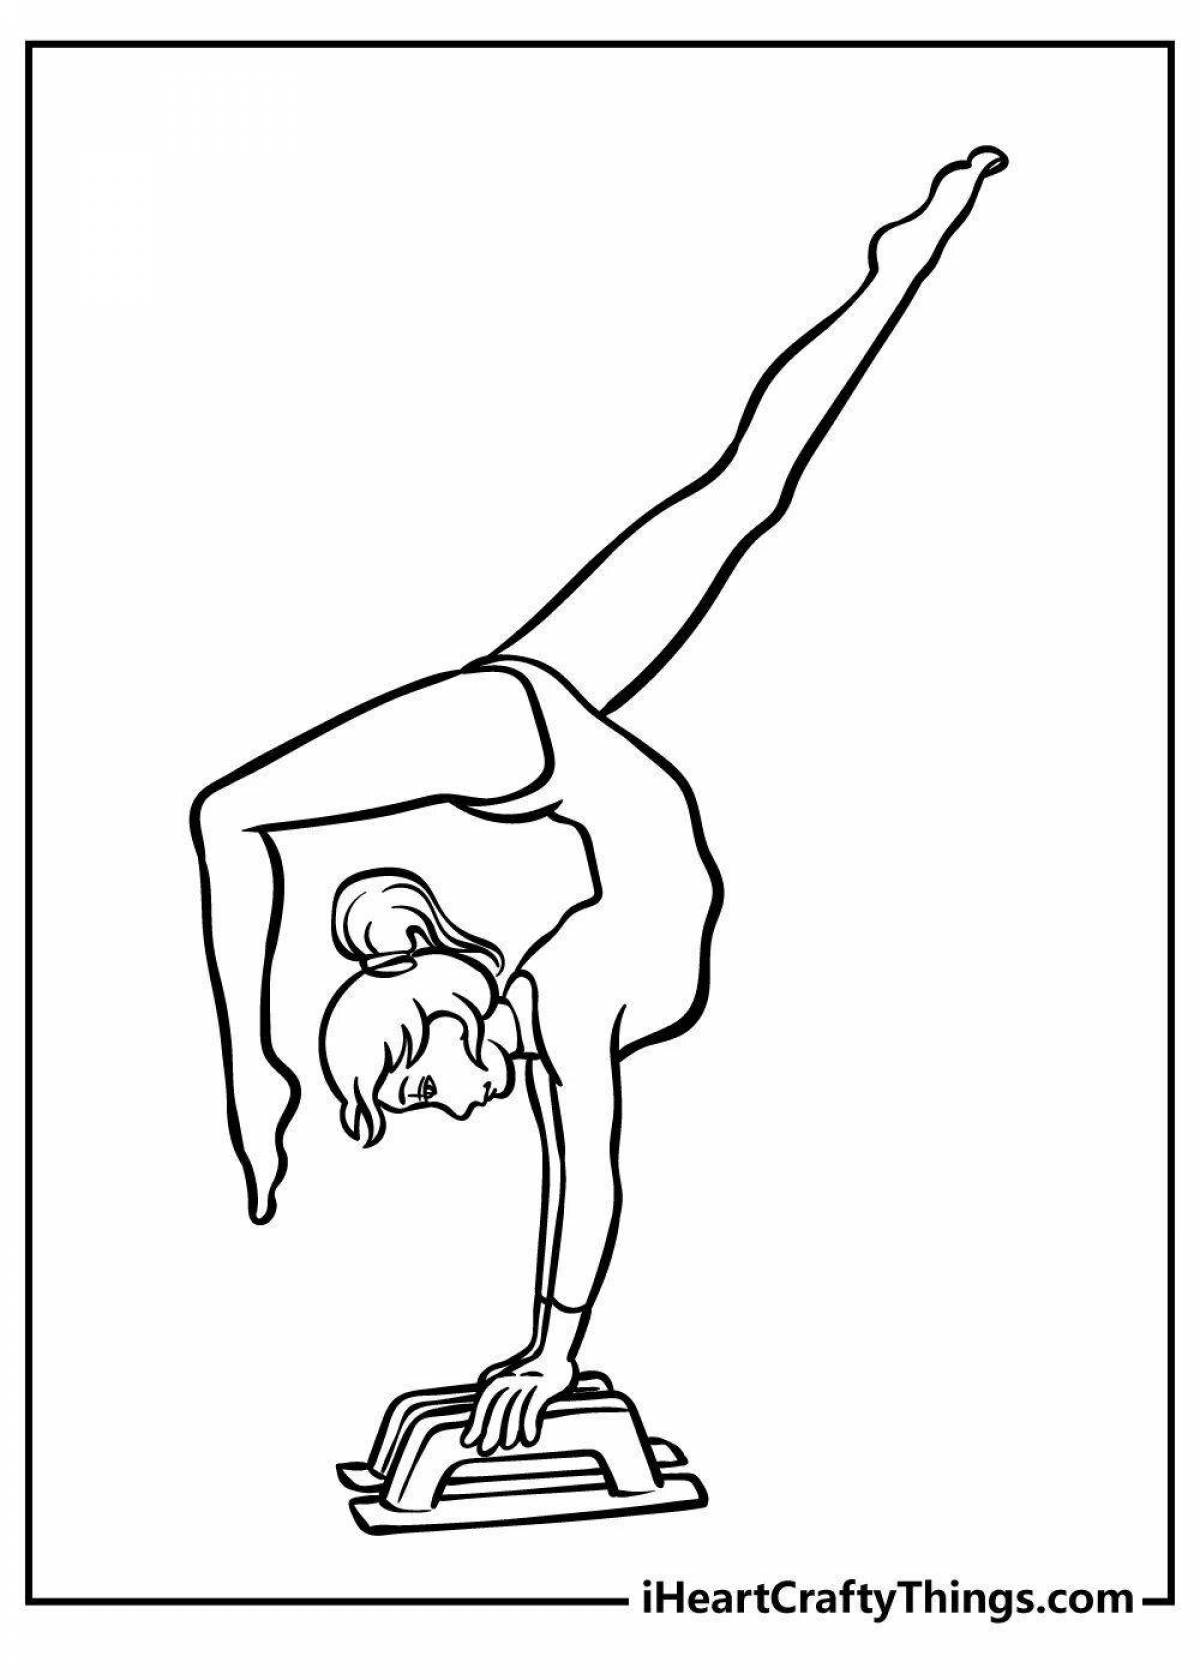 Coloring page dazzling gymnast for kids